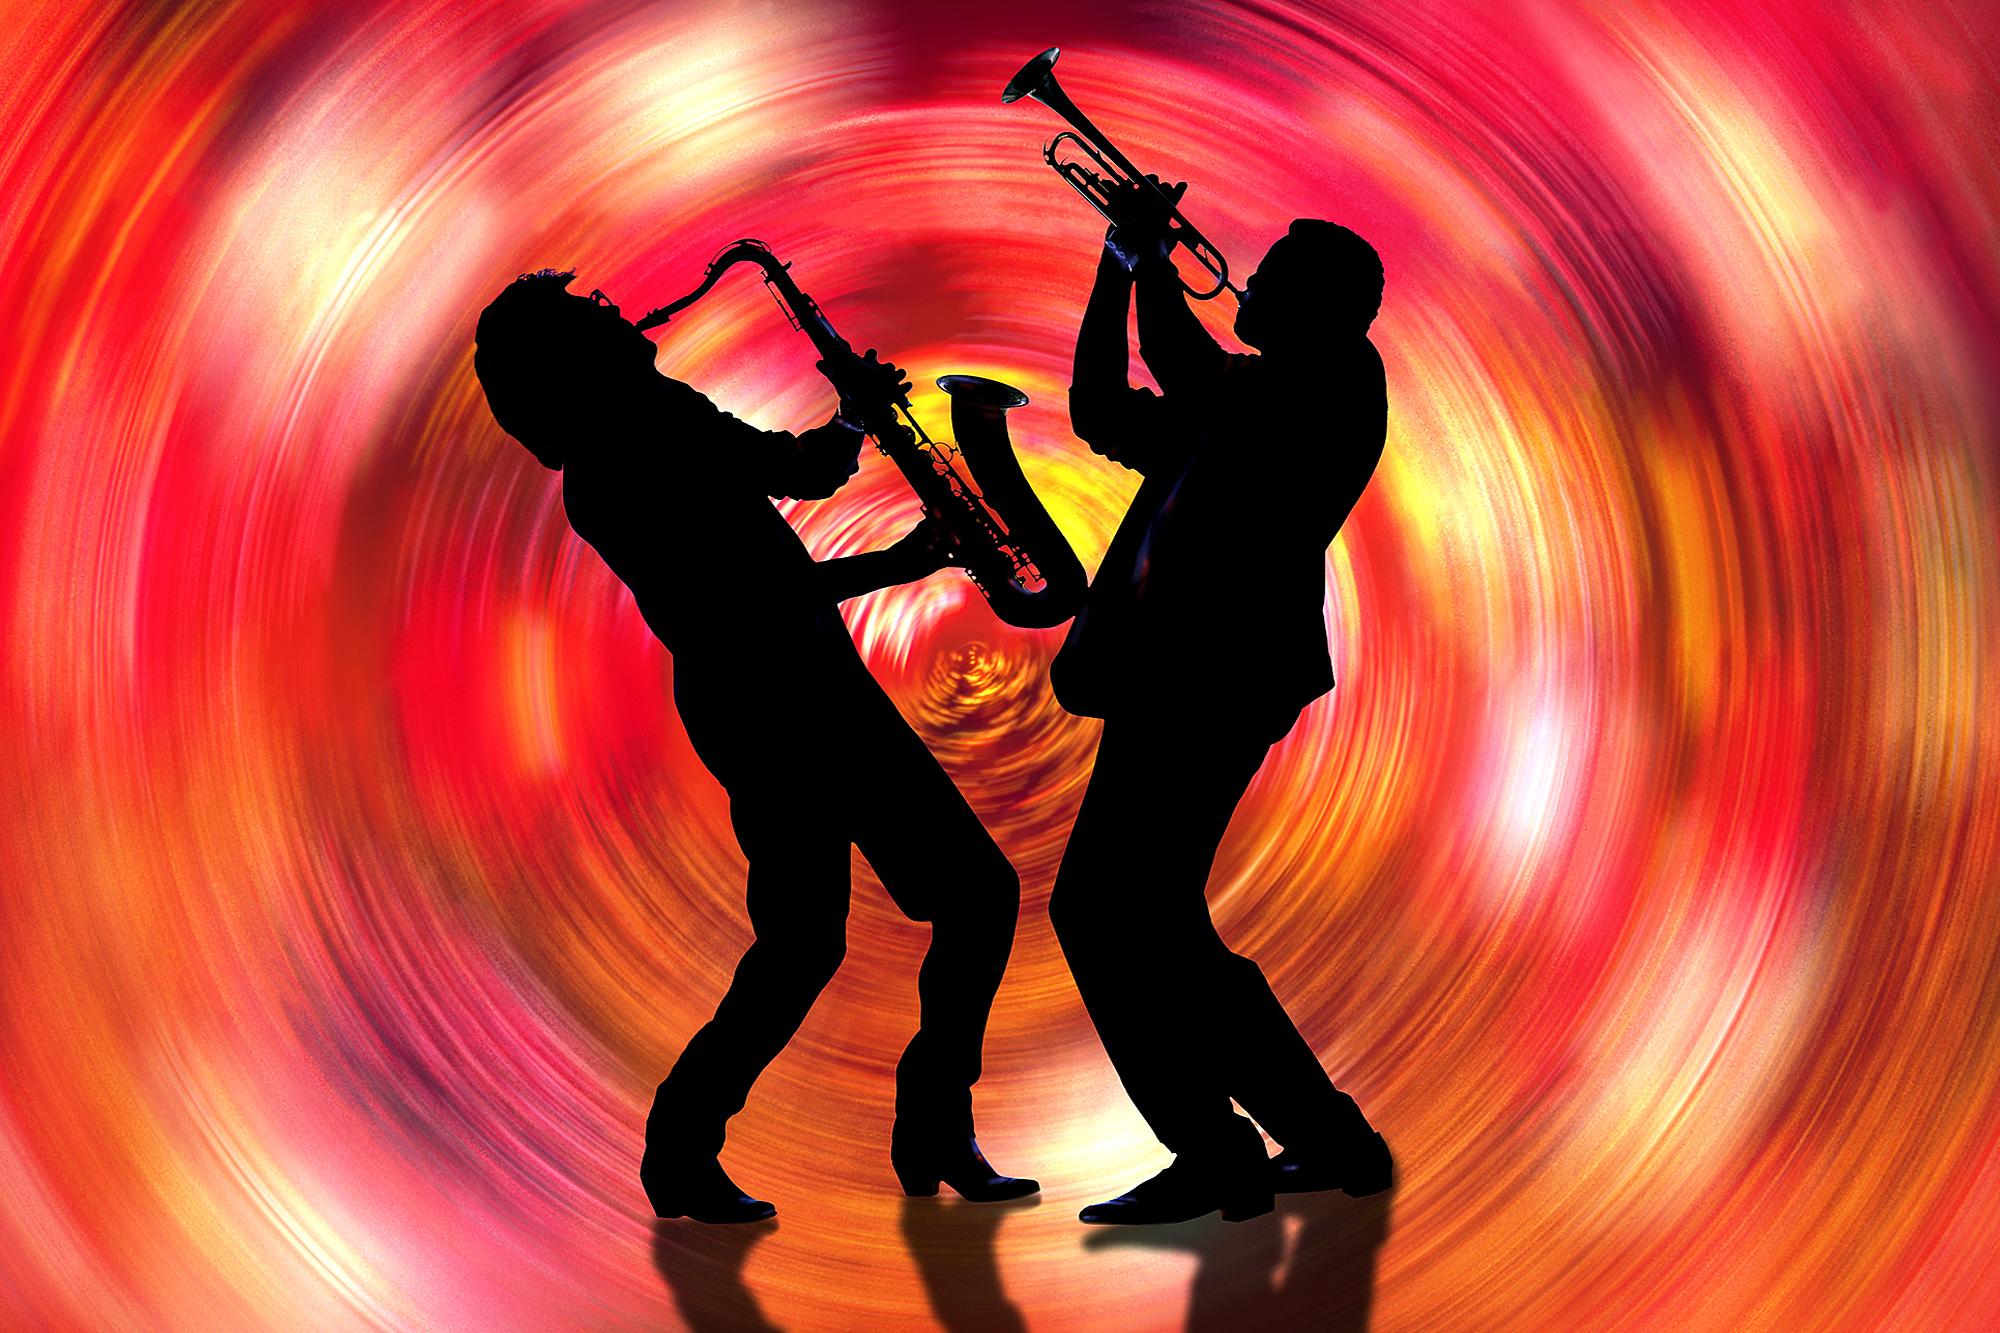 Mitchell Funk Color Photograph - Jazz Musicians Saxophone and Trumpet Vibe in Red Swirl  - Music is Color